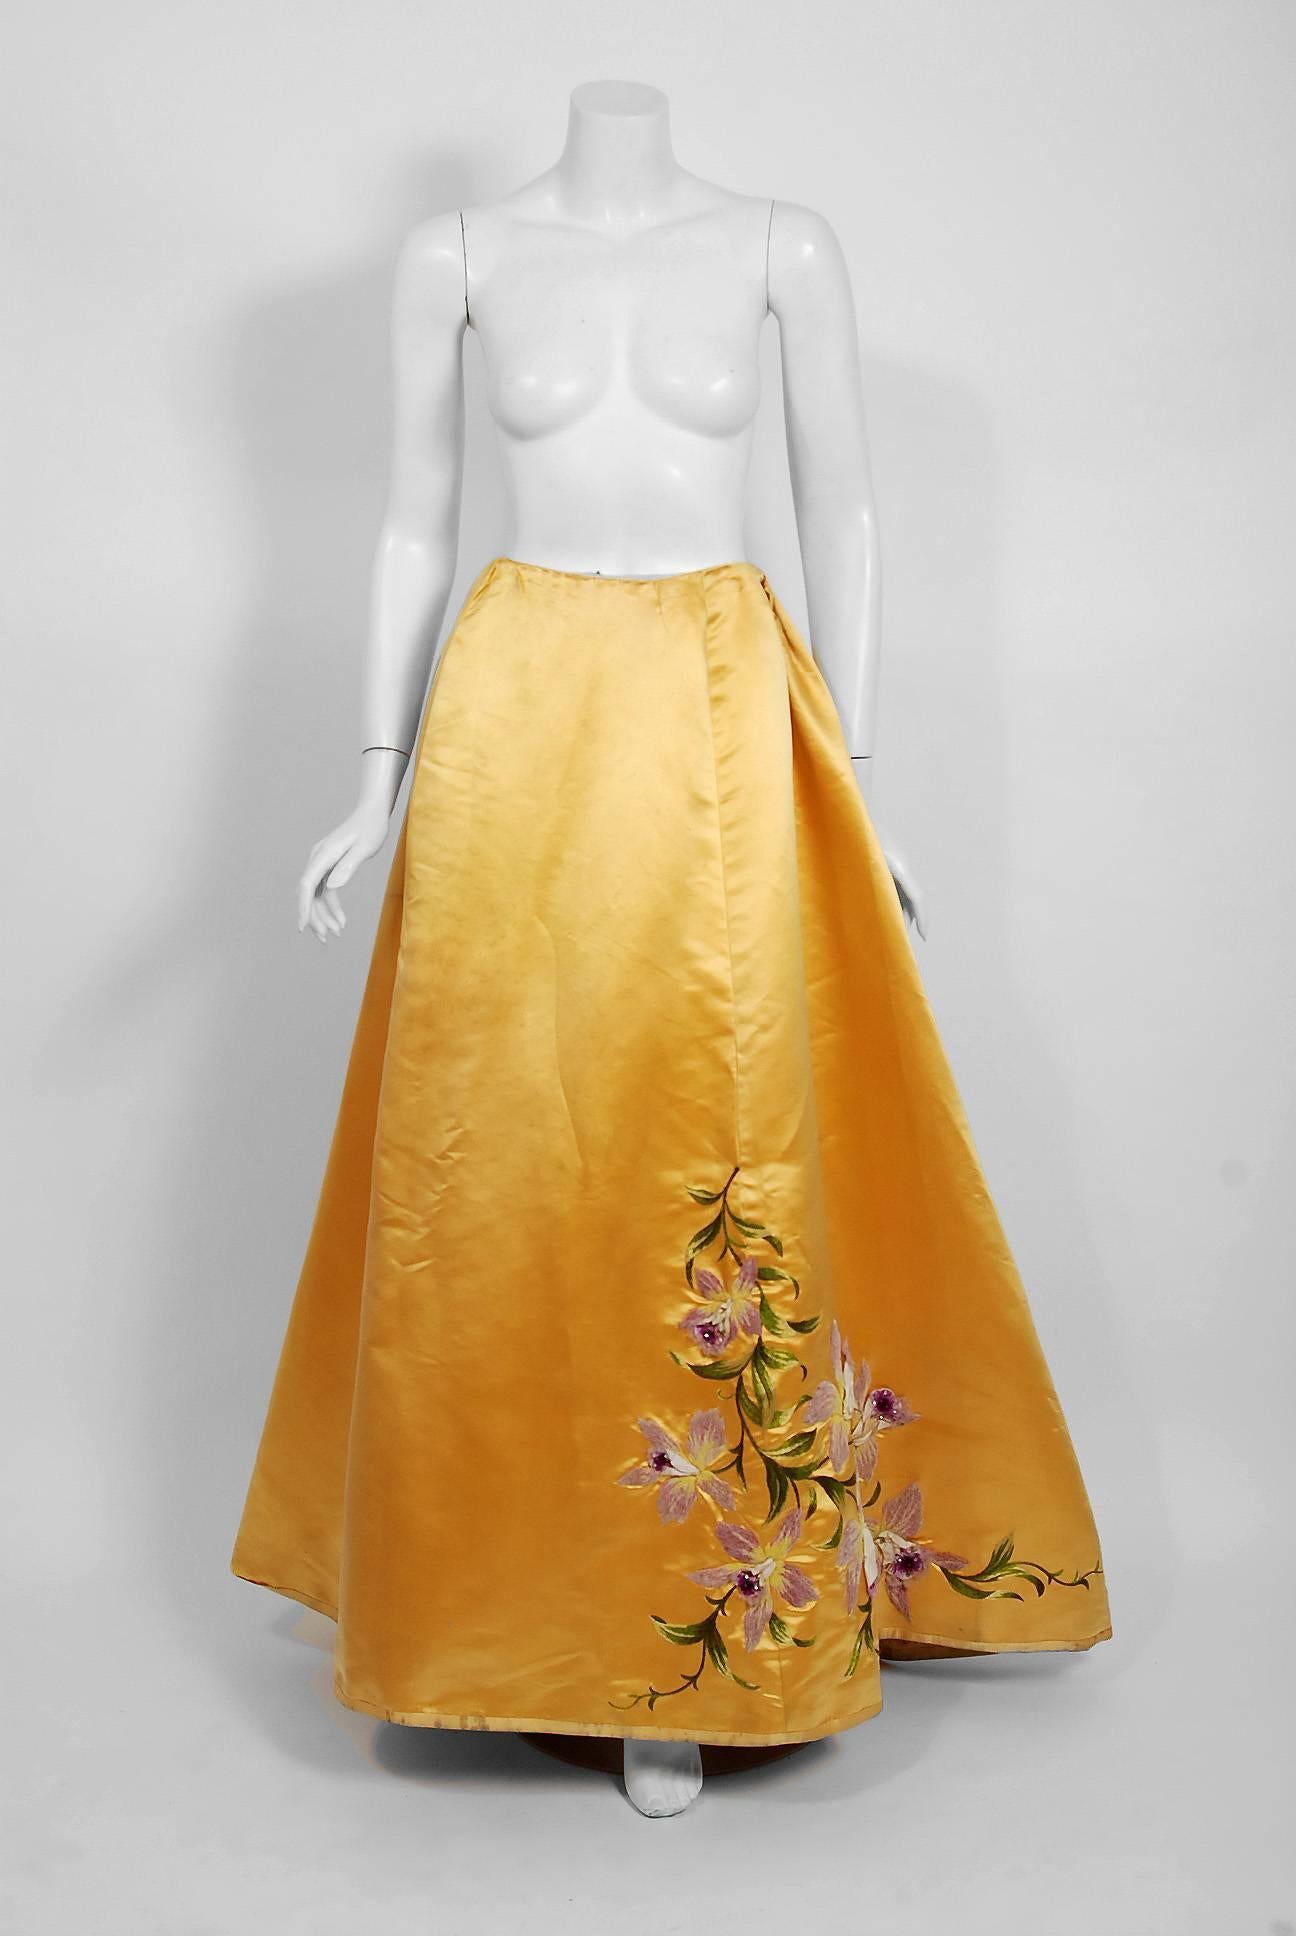 Vintage 1890's Victorian French Couture Floral Embroidered Yellow Satin Gown For Sale 4